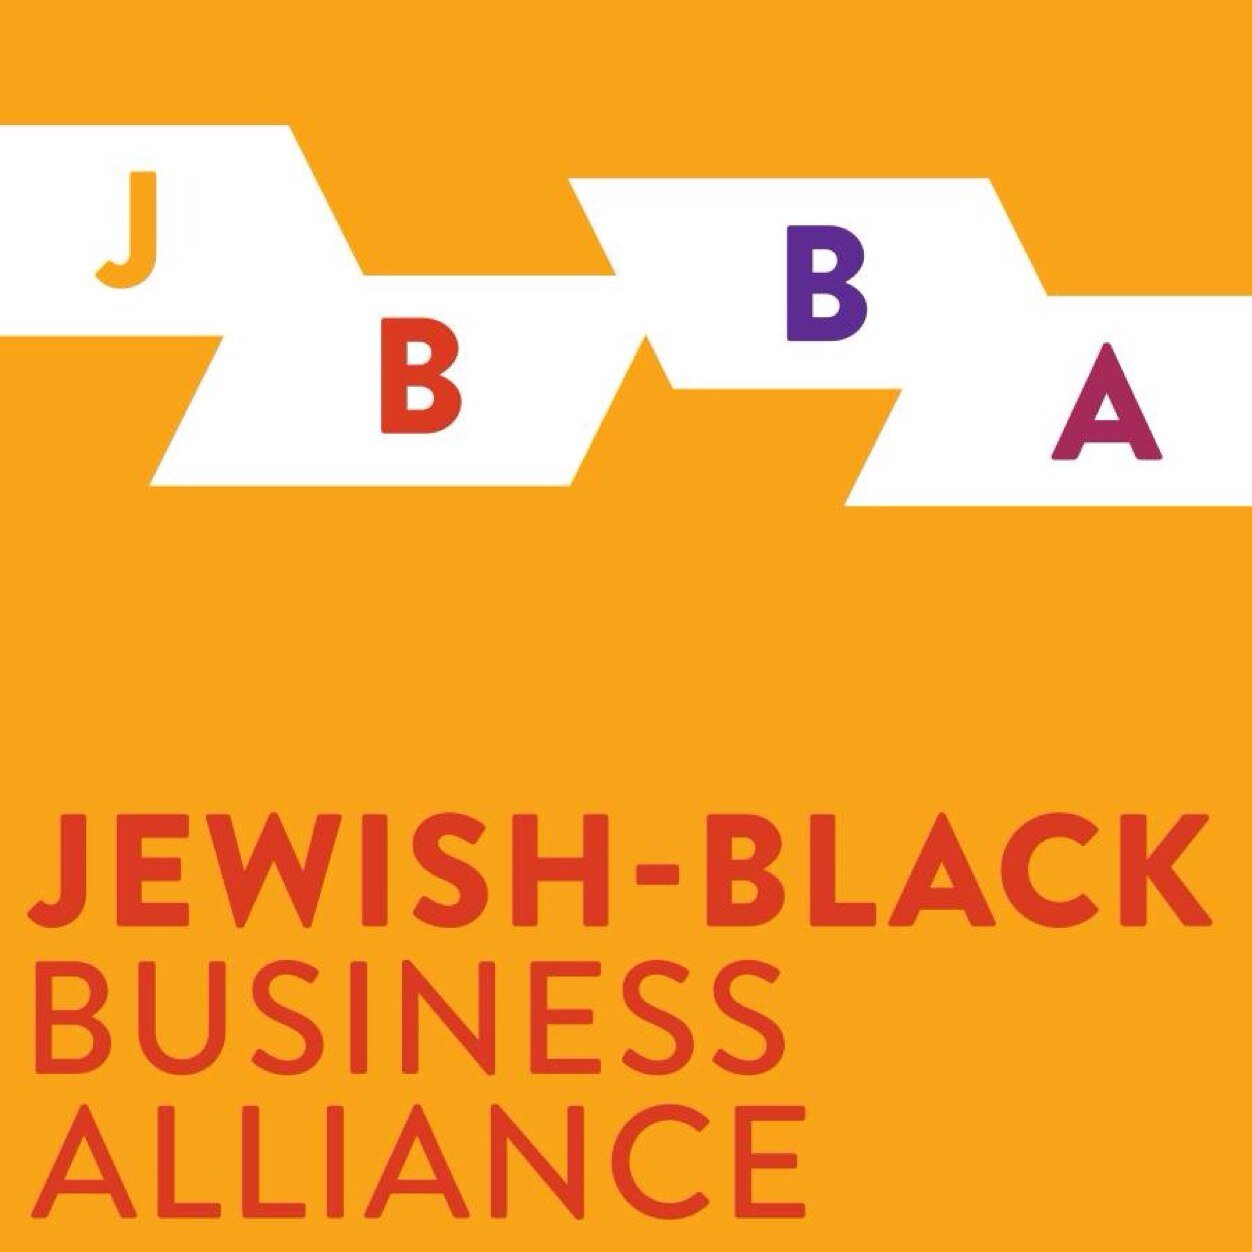 Jewish-Black Business Alliance. Business and civic leaders committed to improving our shared community. Founded 2013.